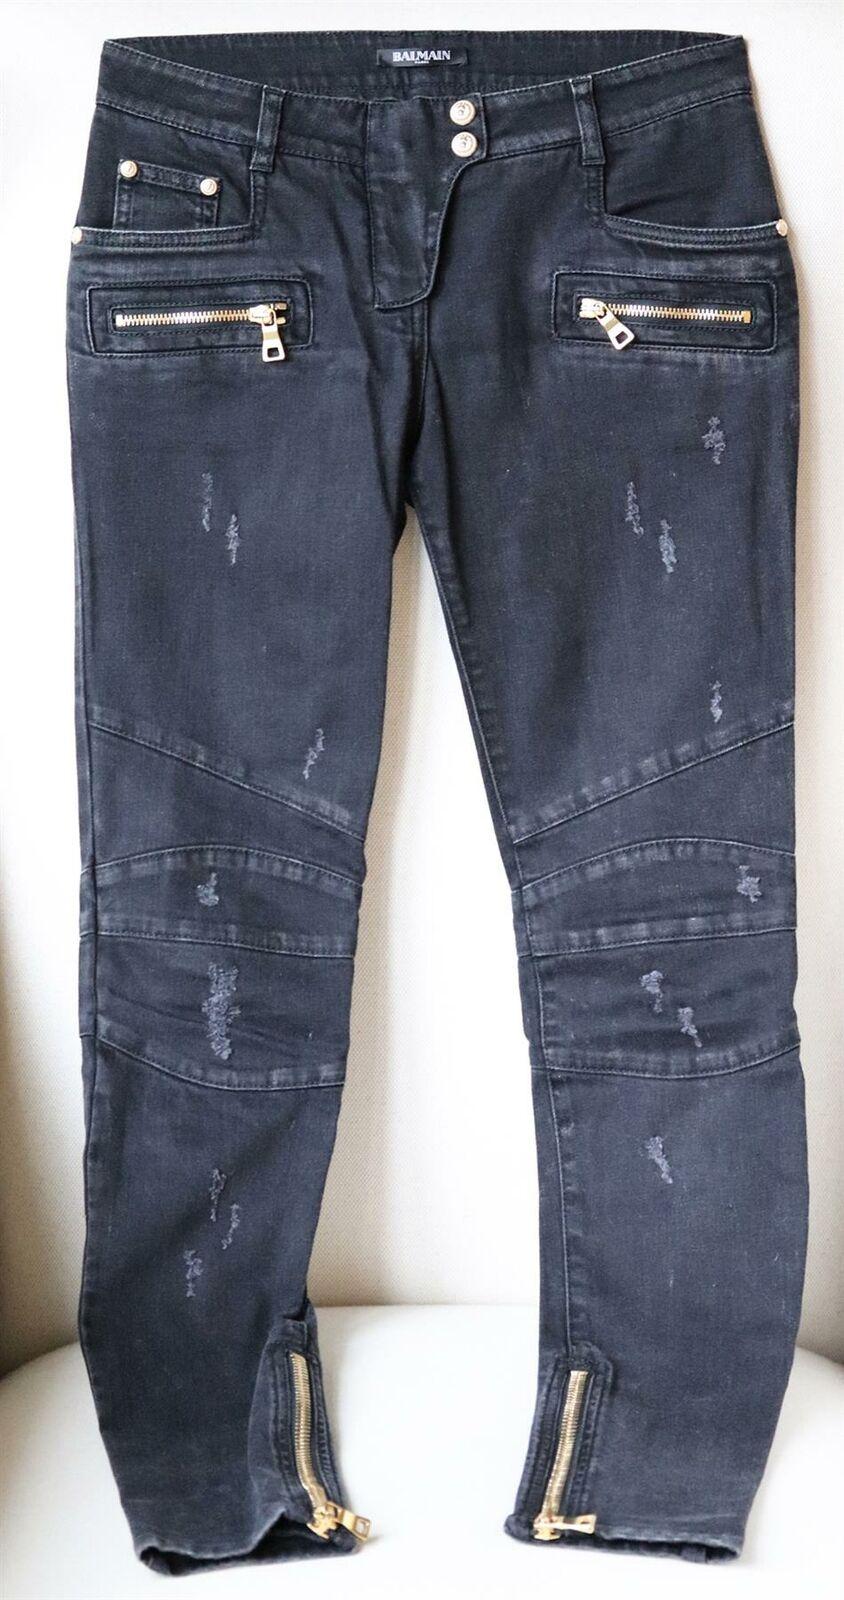 Balmain always knows how to turn a classic item into something a lot more edgy, and these jeans are no different.
These black stretch-denim fitted pair features signature biker-style paneling and zipped ankles.
Black heavyweight denim.
Snap button